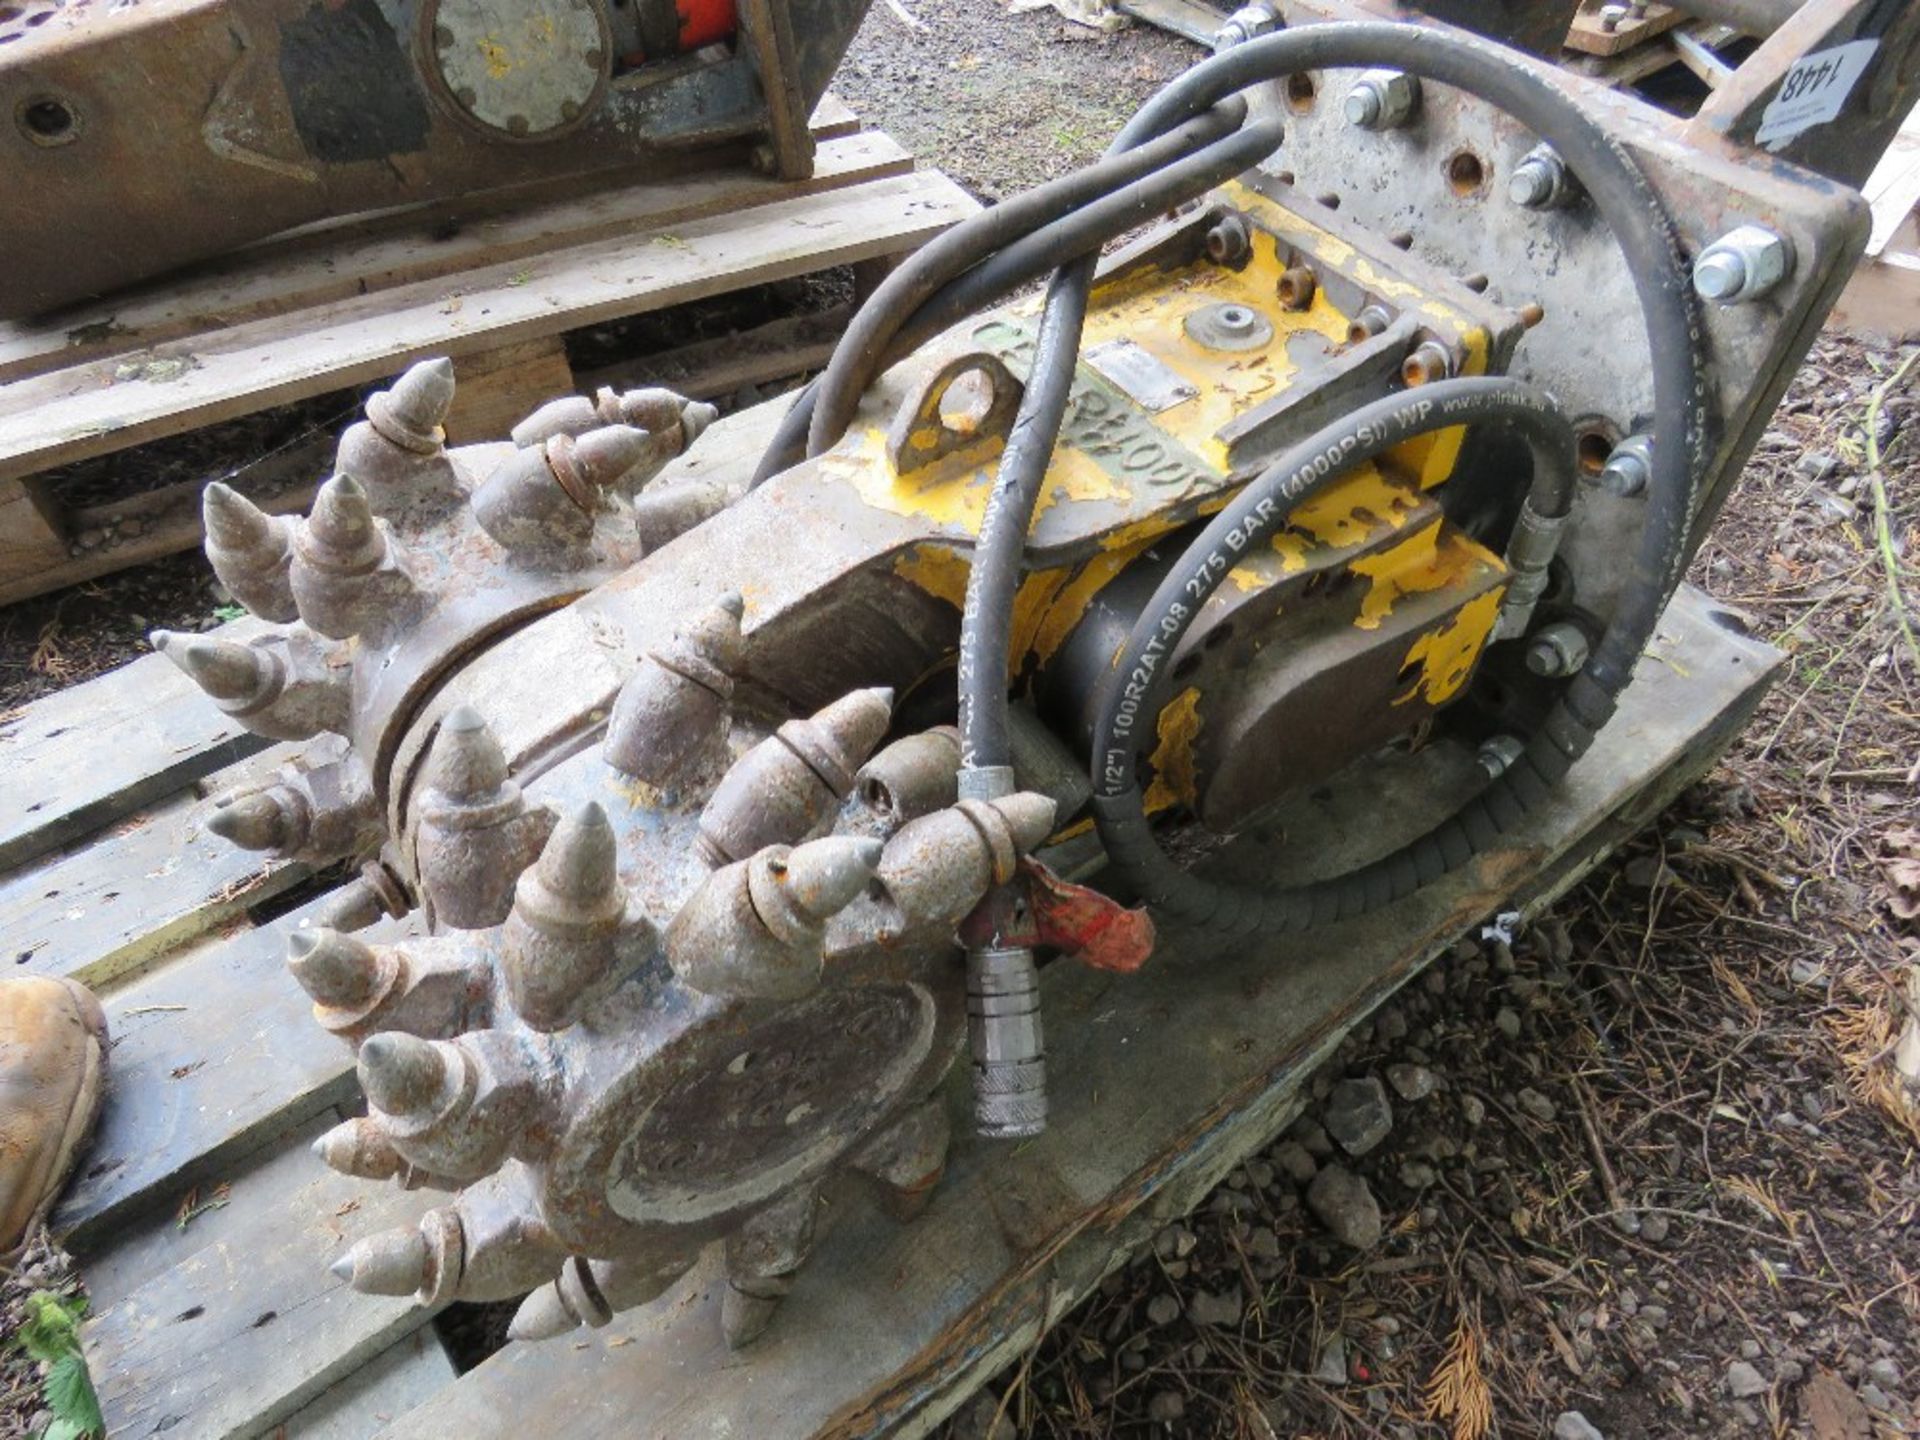 ROCK WHEEL D10 BG5 TWIN HEAD ROCK GRINDING HEAD/PLANER FOR EXCAVATOR. ON 45MM PINS. WORKING WHEN R - Image 5 of 5